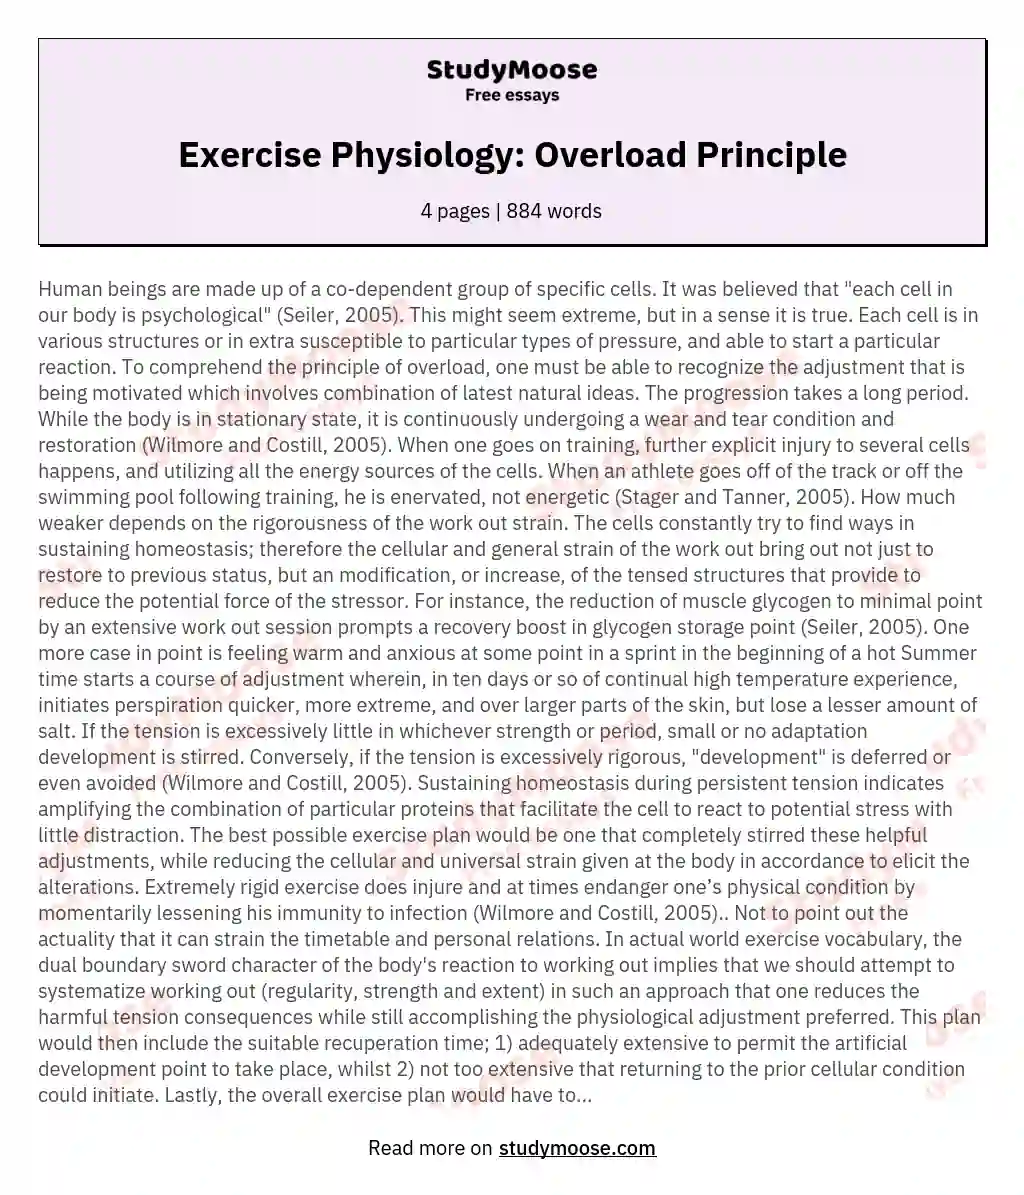 Exercise Physiology: Overload Principle